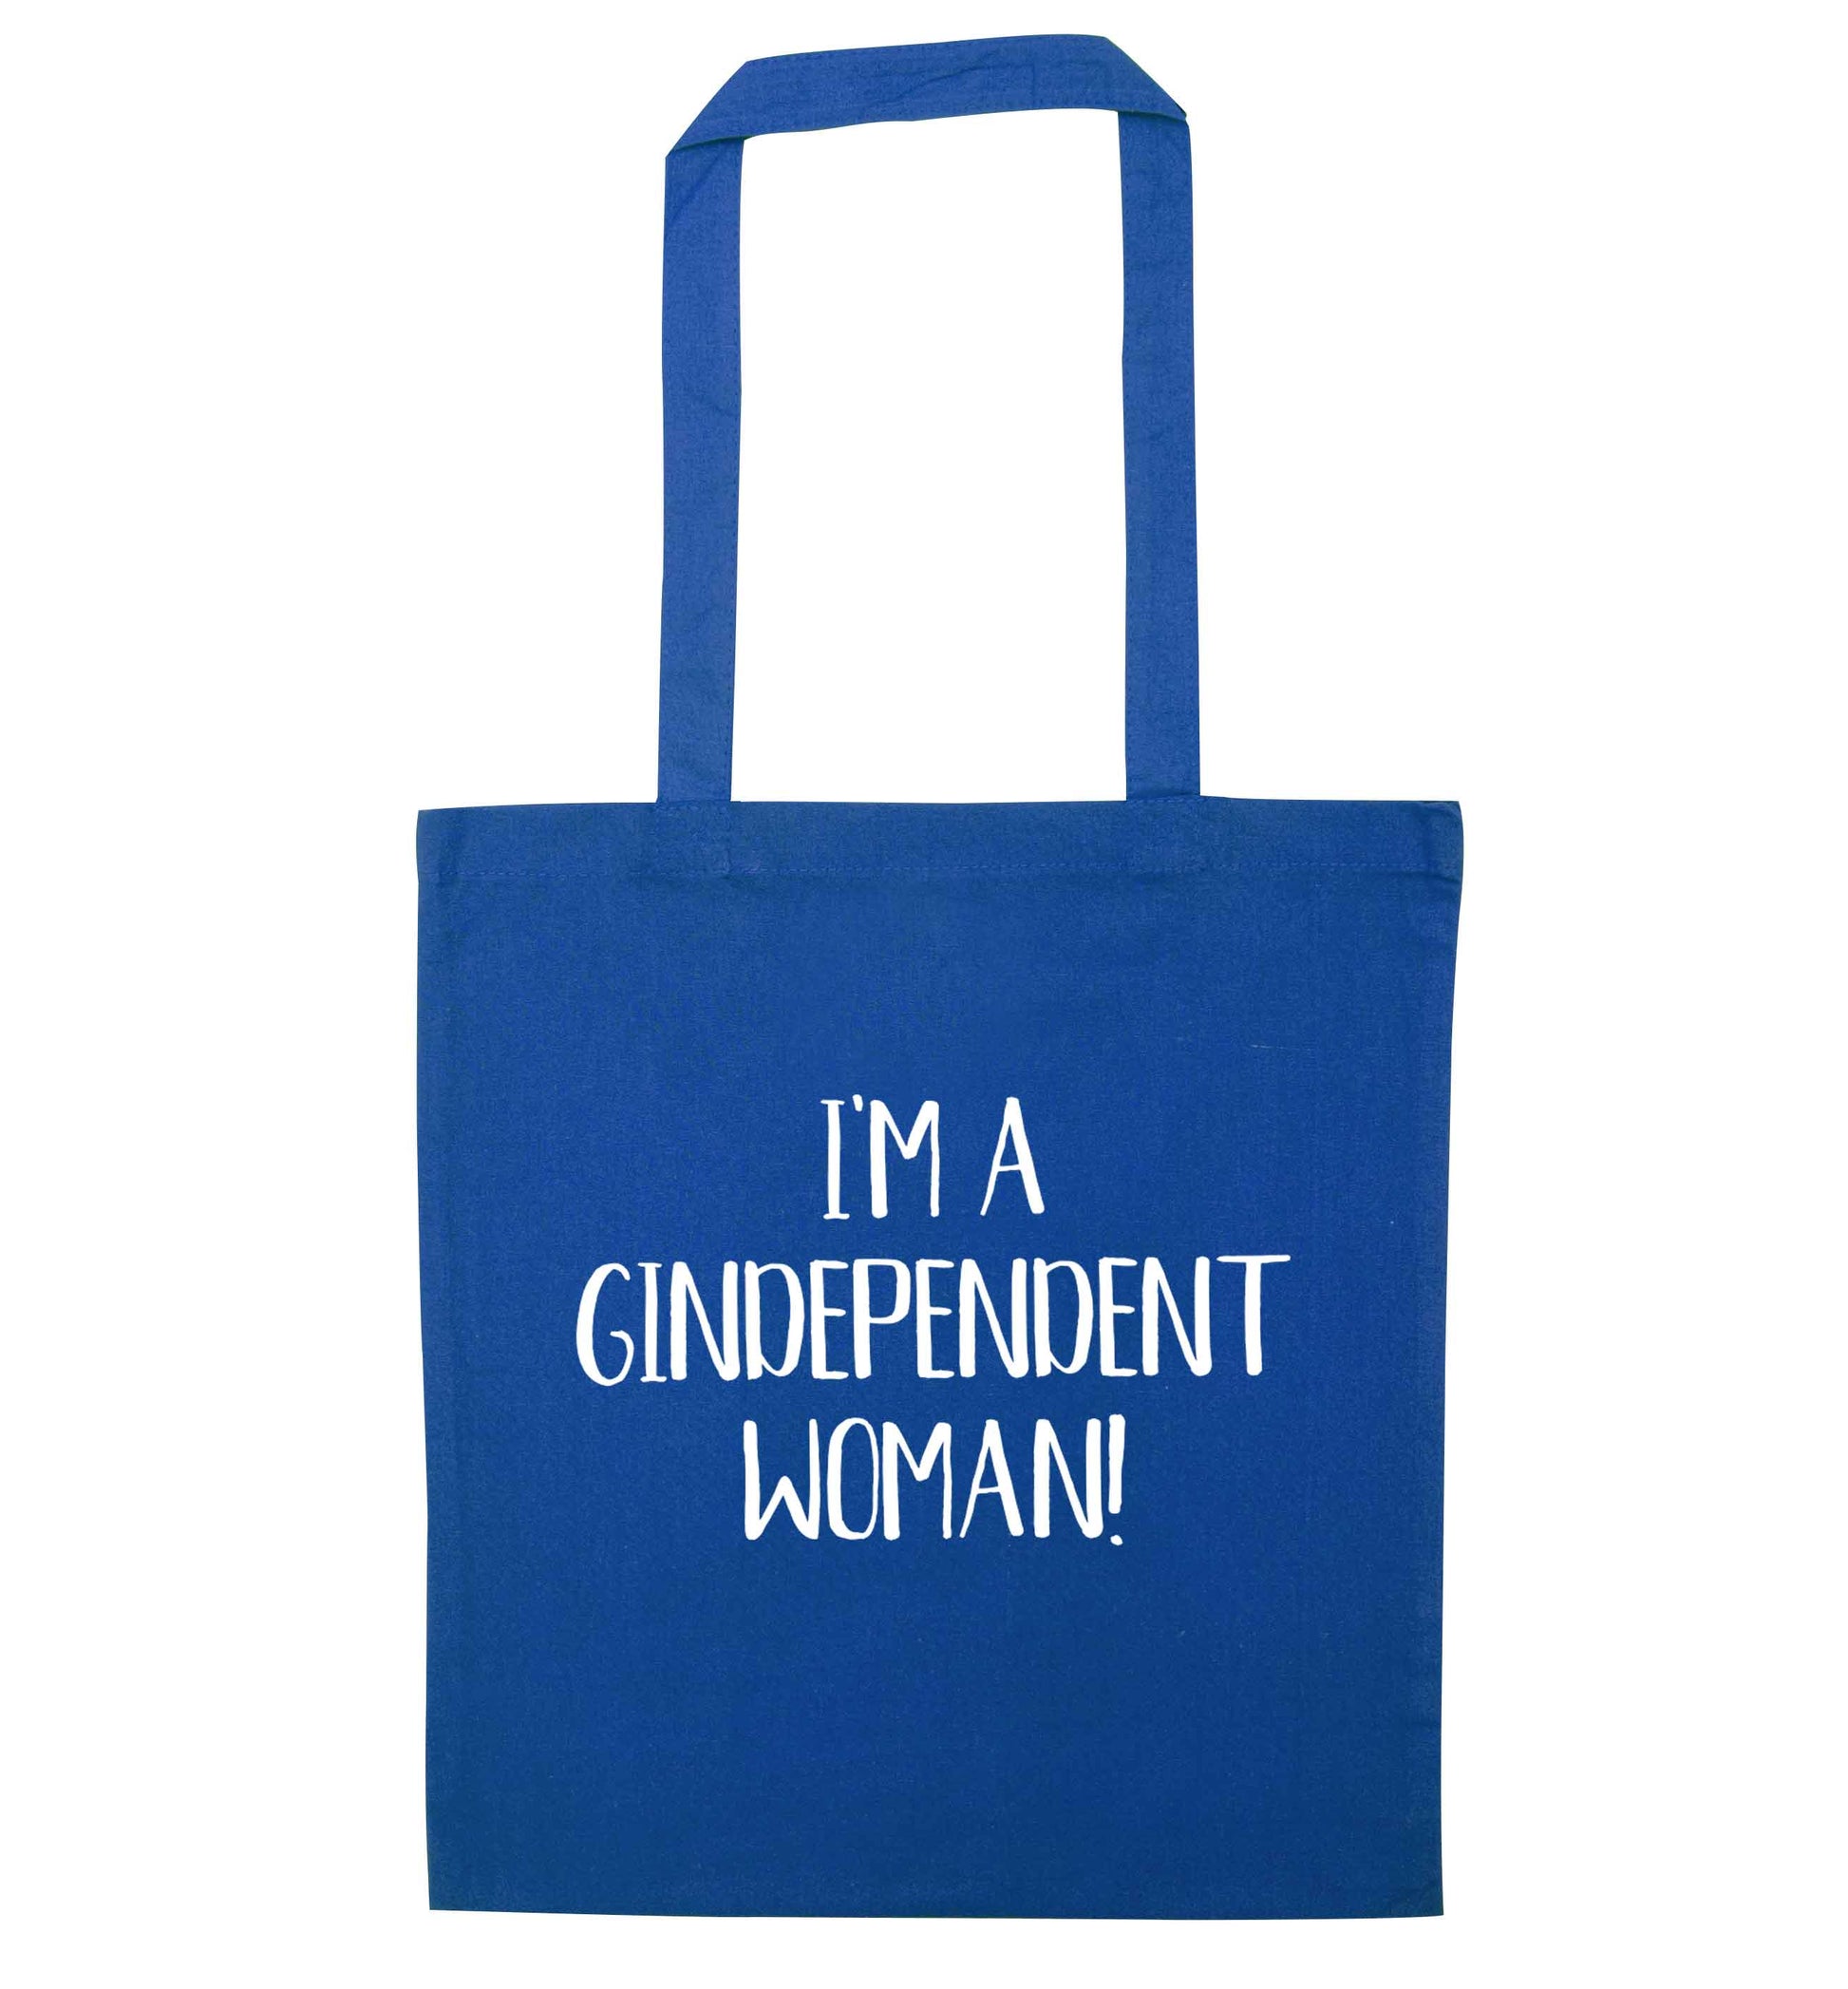 I'm a gindependent woman blue tote bag